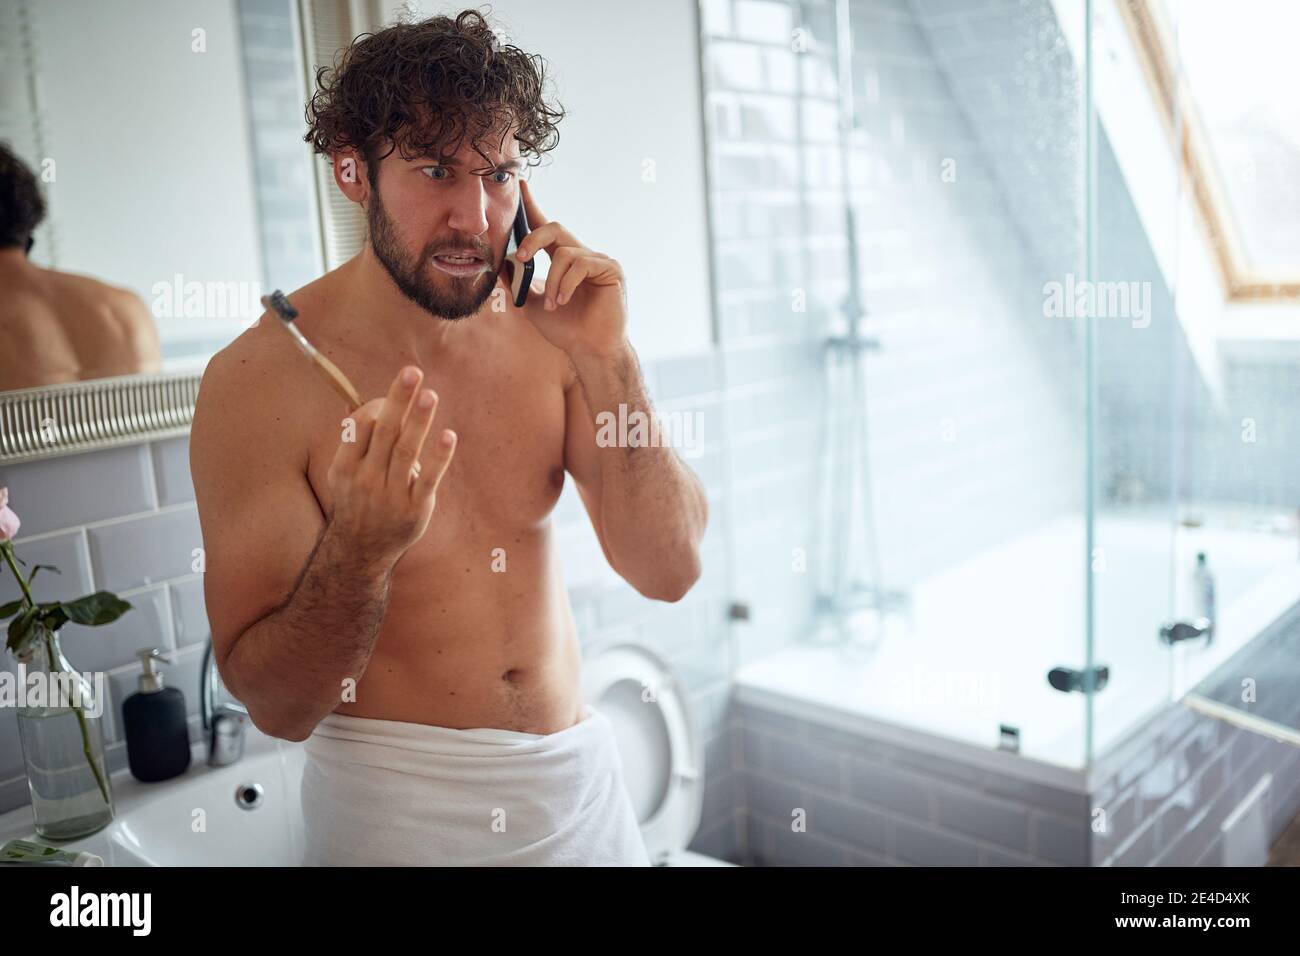 Topless man fighting while brushing teeth in the bathroom Stock Photo